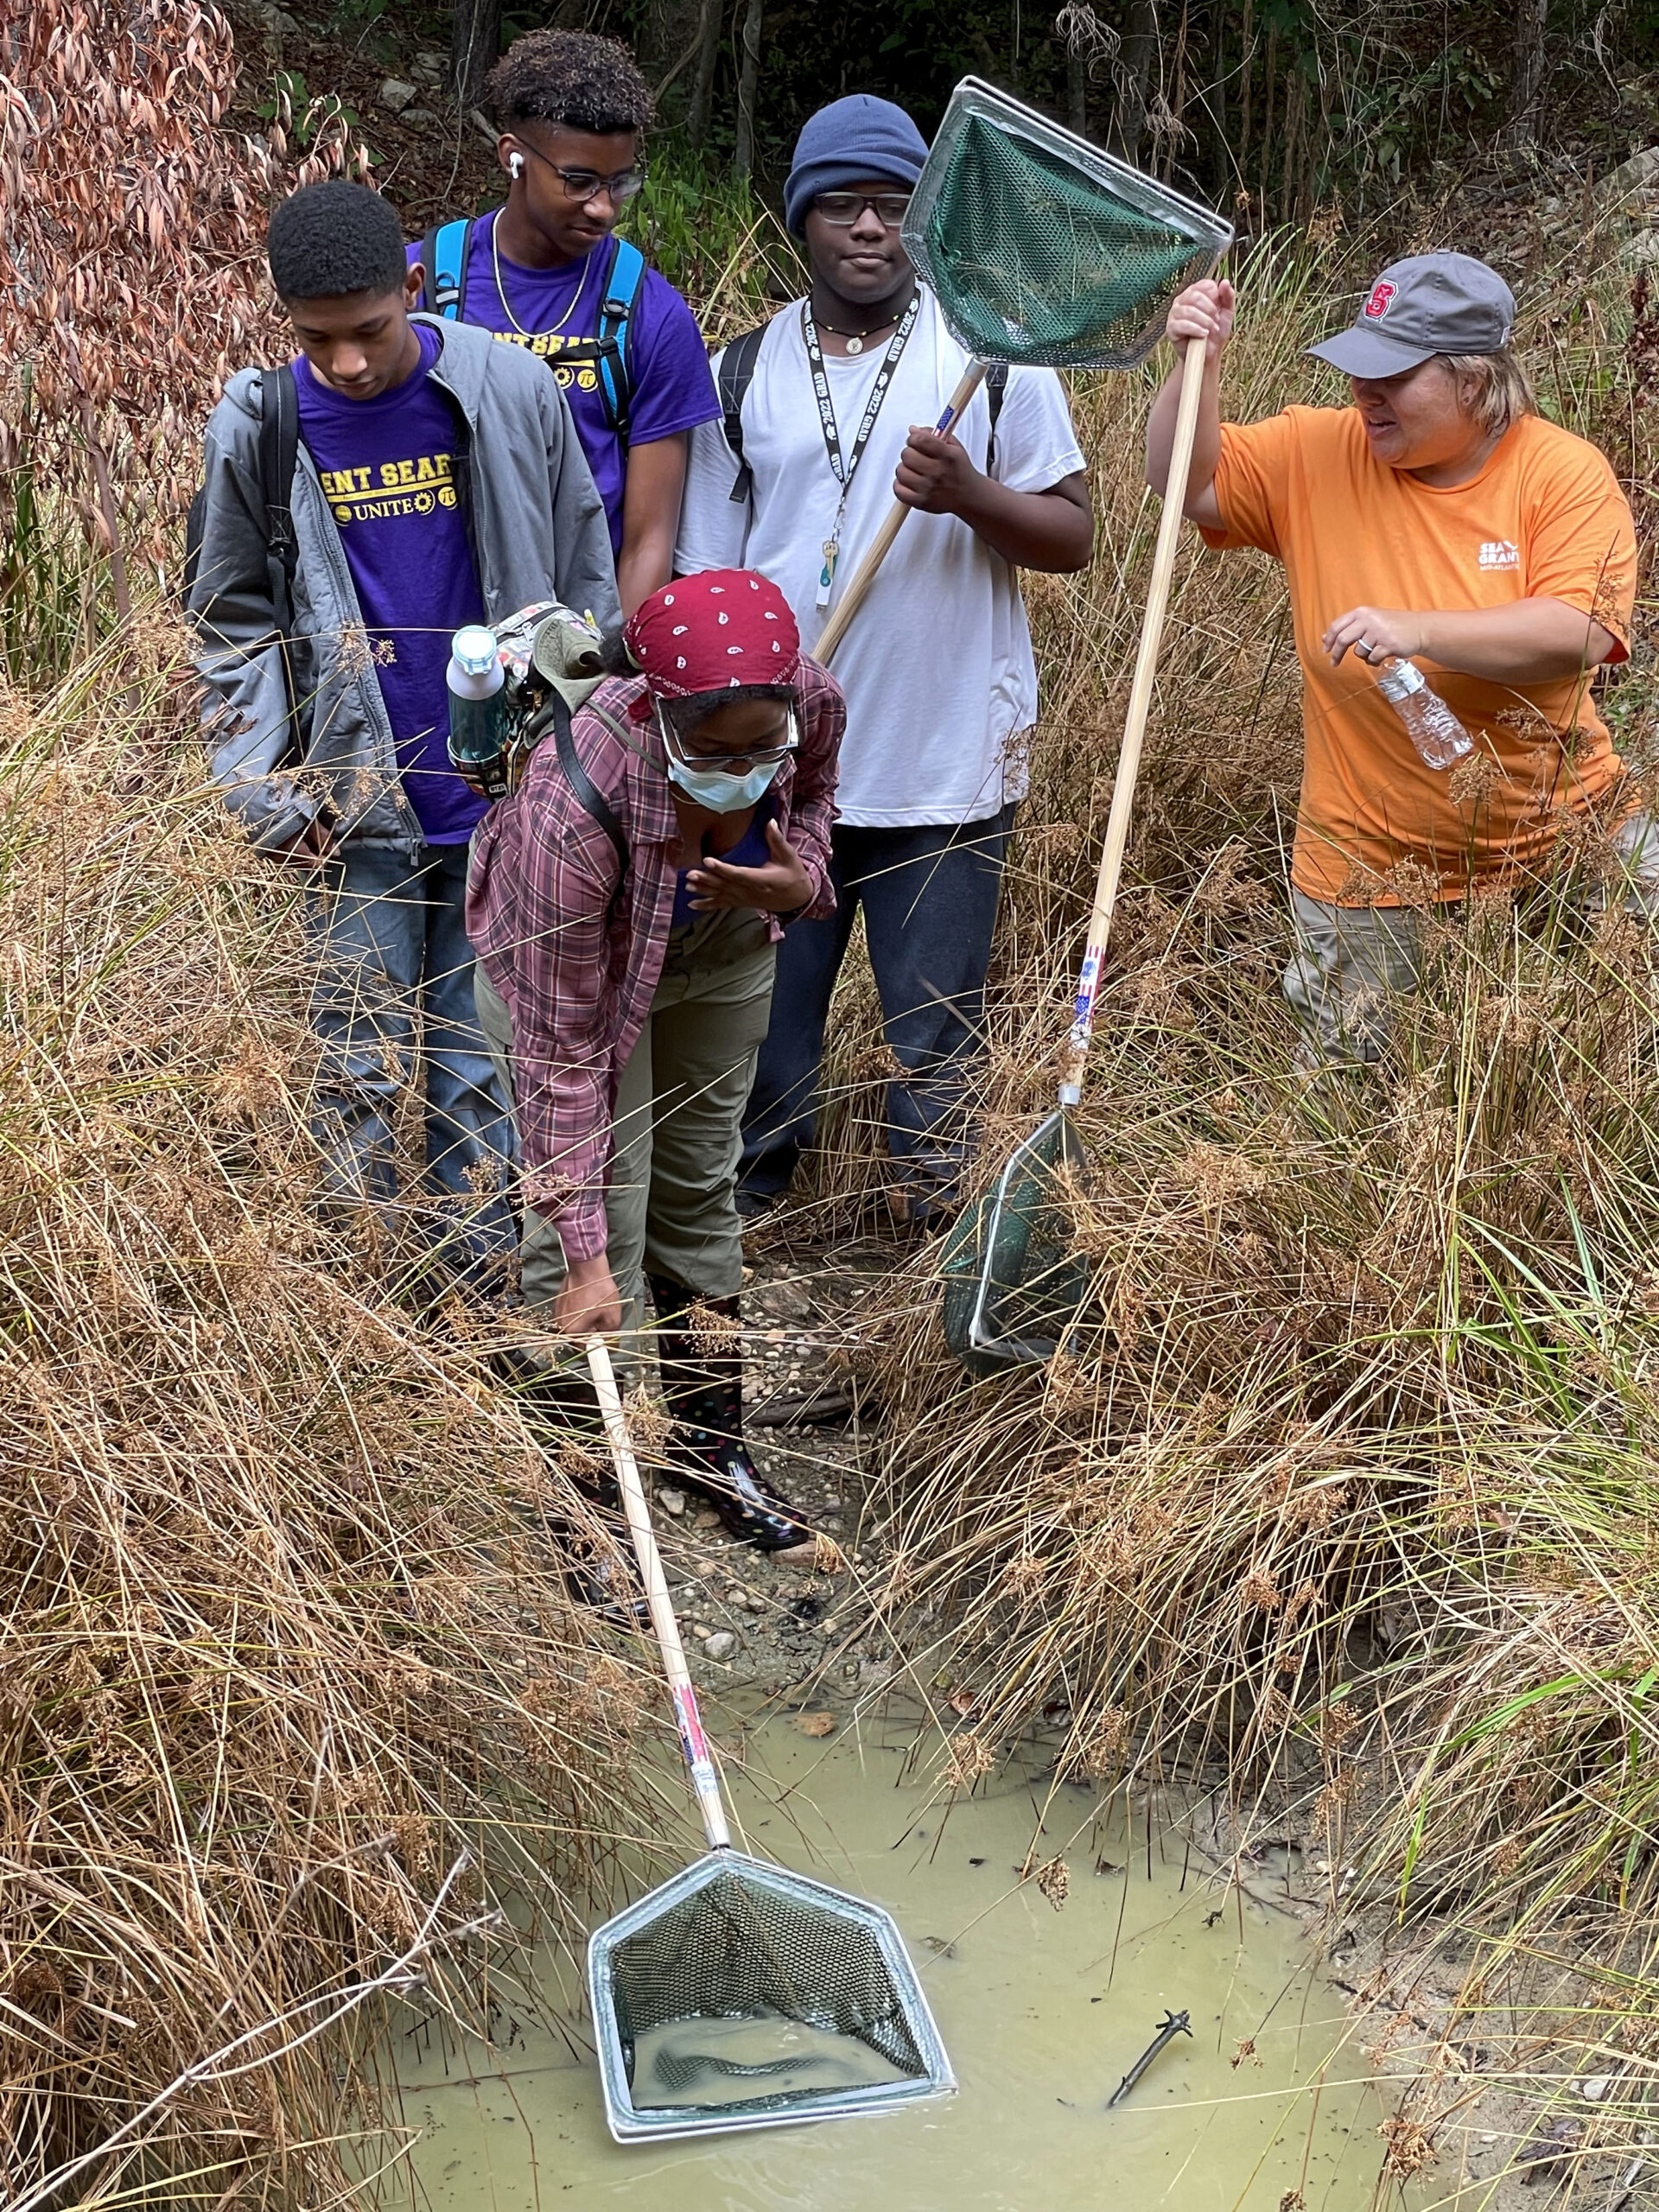 Four students and an instructor stand in a marshy area, one student holds a net on a long pole while another one uses their pole to scoop up something from a muddy pool.